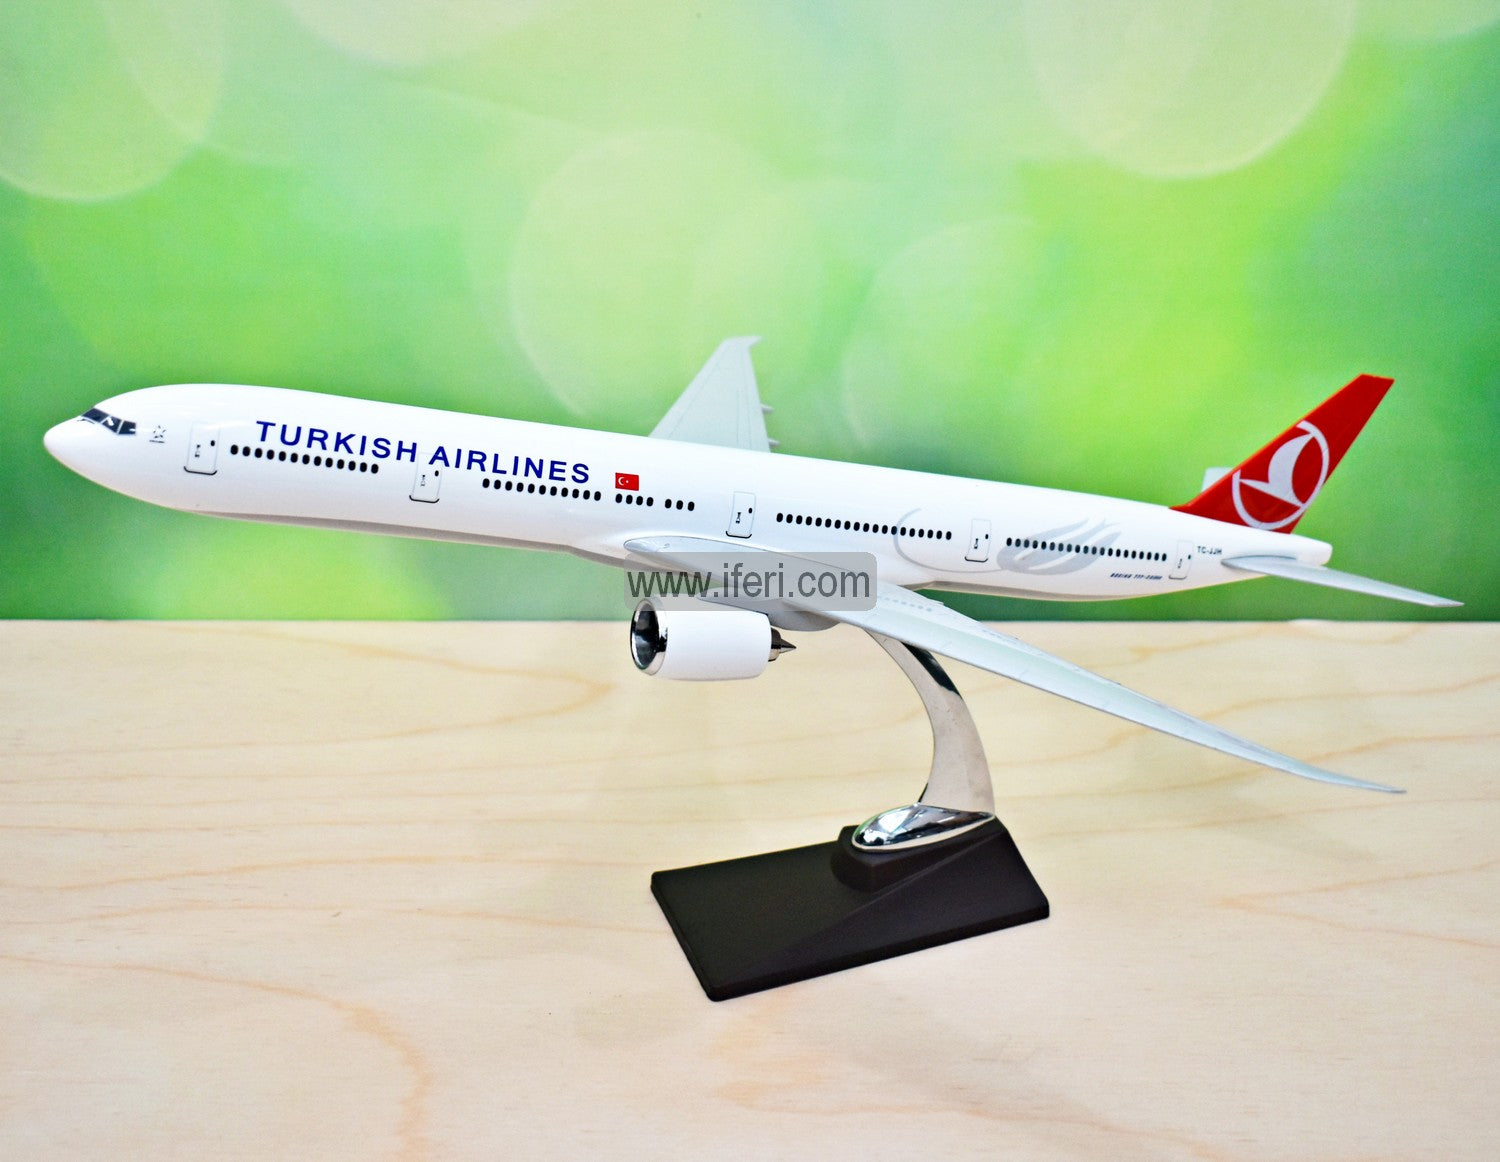 18 Inch Die Cast Resin Turkish Airlines Airplane Model Toy Showpiece with Base RY2216